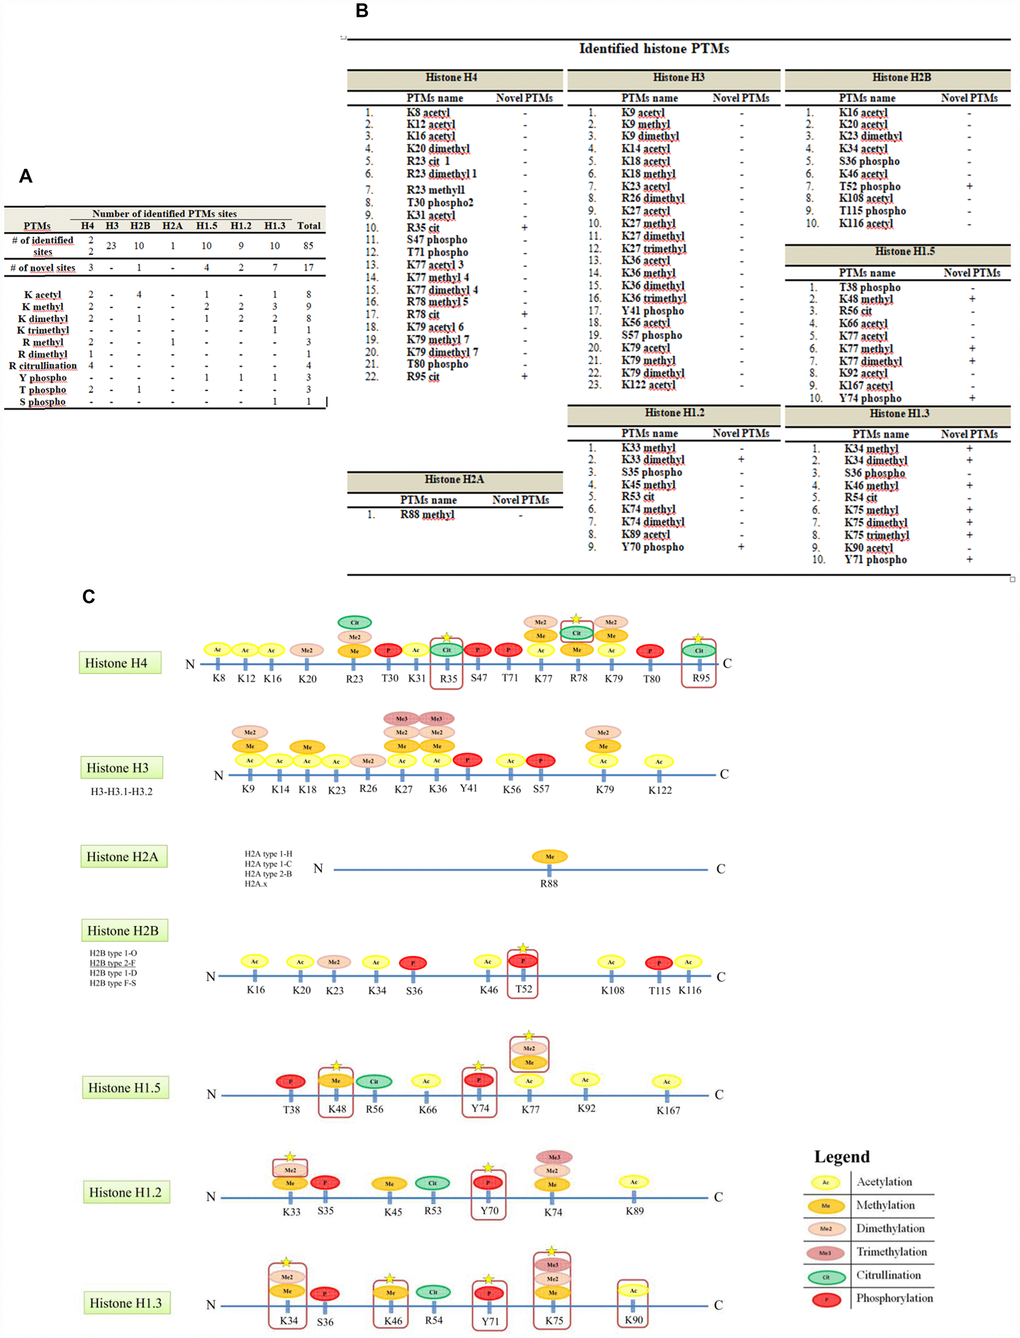 Histone PTMs sites identified by this study. (A) The table summarizes all the PTMs sites identified. Using the described approach, we identified a total of eighty-five histones PTMs, seventeen of these were not previously described on the UniProt database. (B) The identified novel modifications consist of 5 lysine methylation, 4 lysine dimethylation, 1 lysine trimethylation, 3 arginine citrullination, 1 threonine phosphorylation and 3 tyrosine phosphorylation. Mass spectrometry data are averages of three biologic replicates. (C) Novel and known sites of PTM along histones sequences. The identified modifications consist of acetylation, methylation, dimethylation, trimethylation, citrullination and phosphorylation. Red boxes indicate novel modifications.